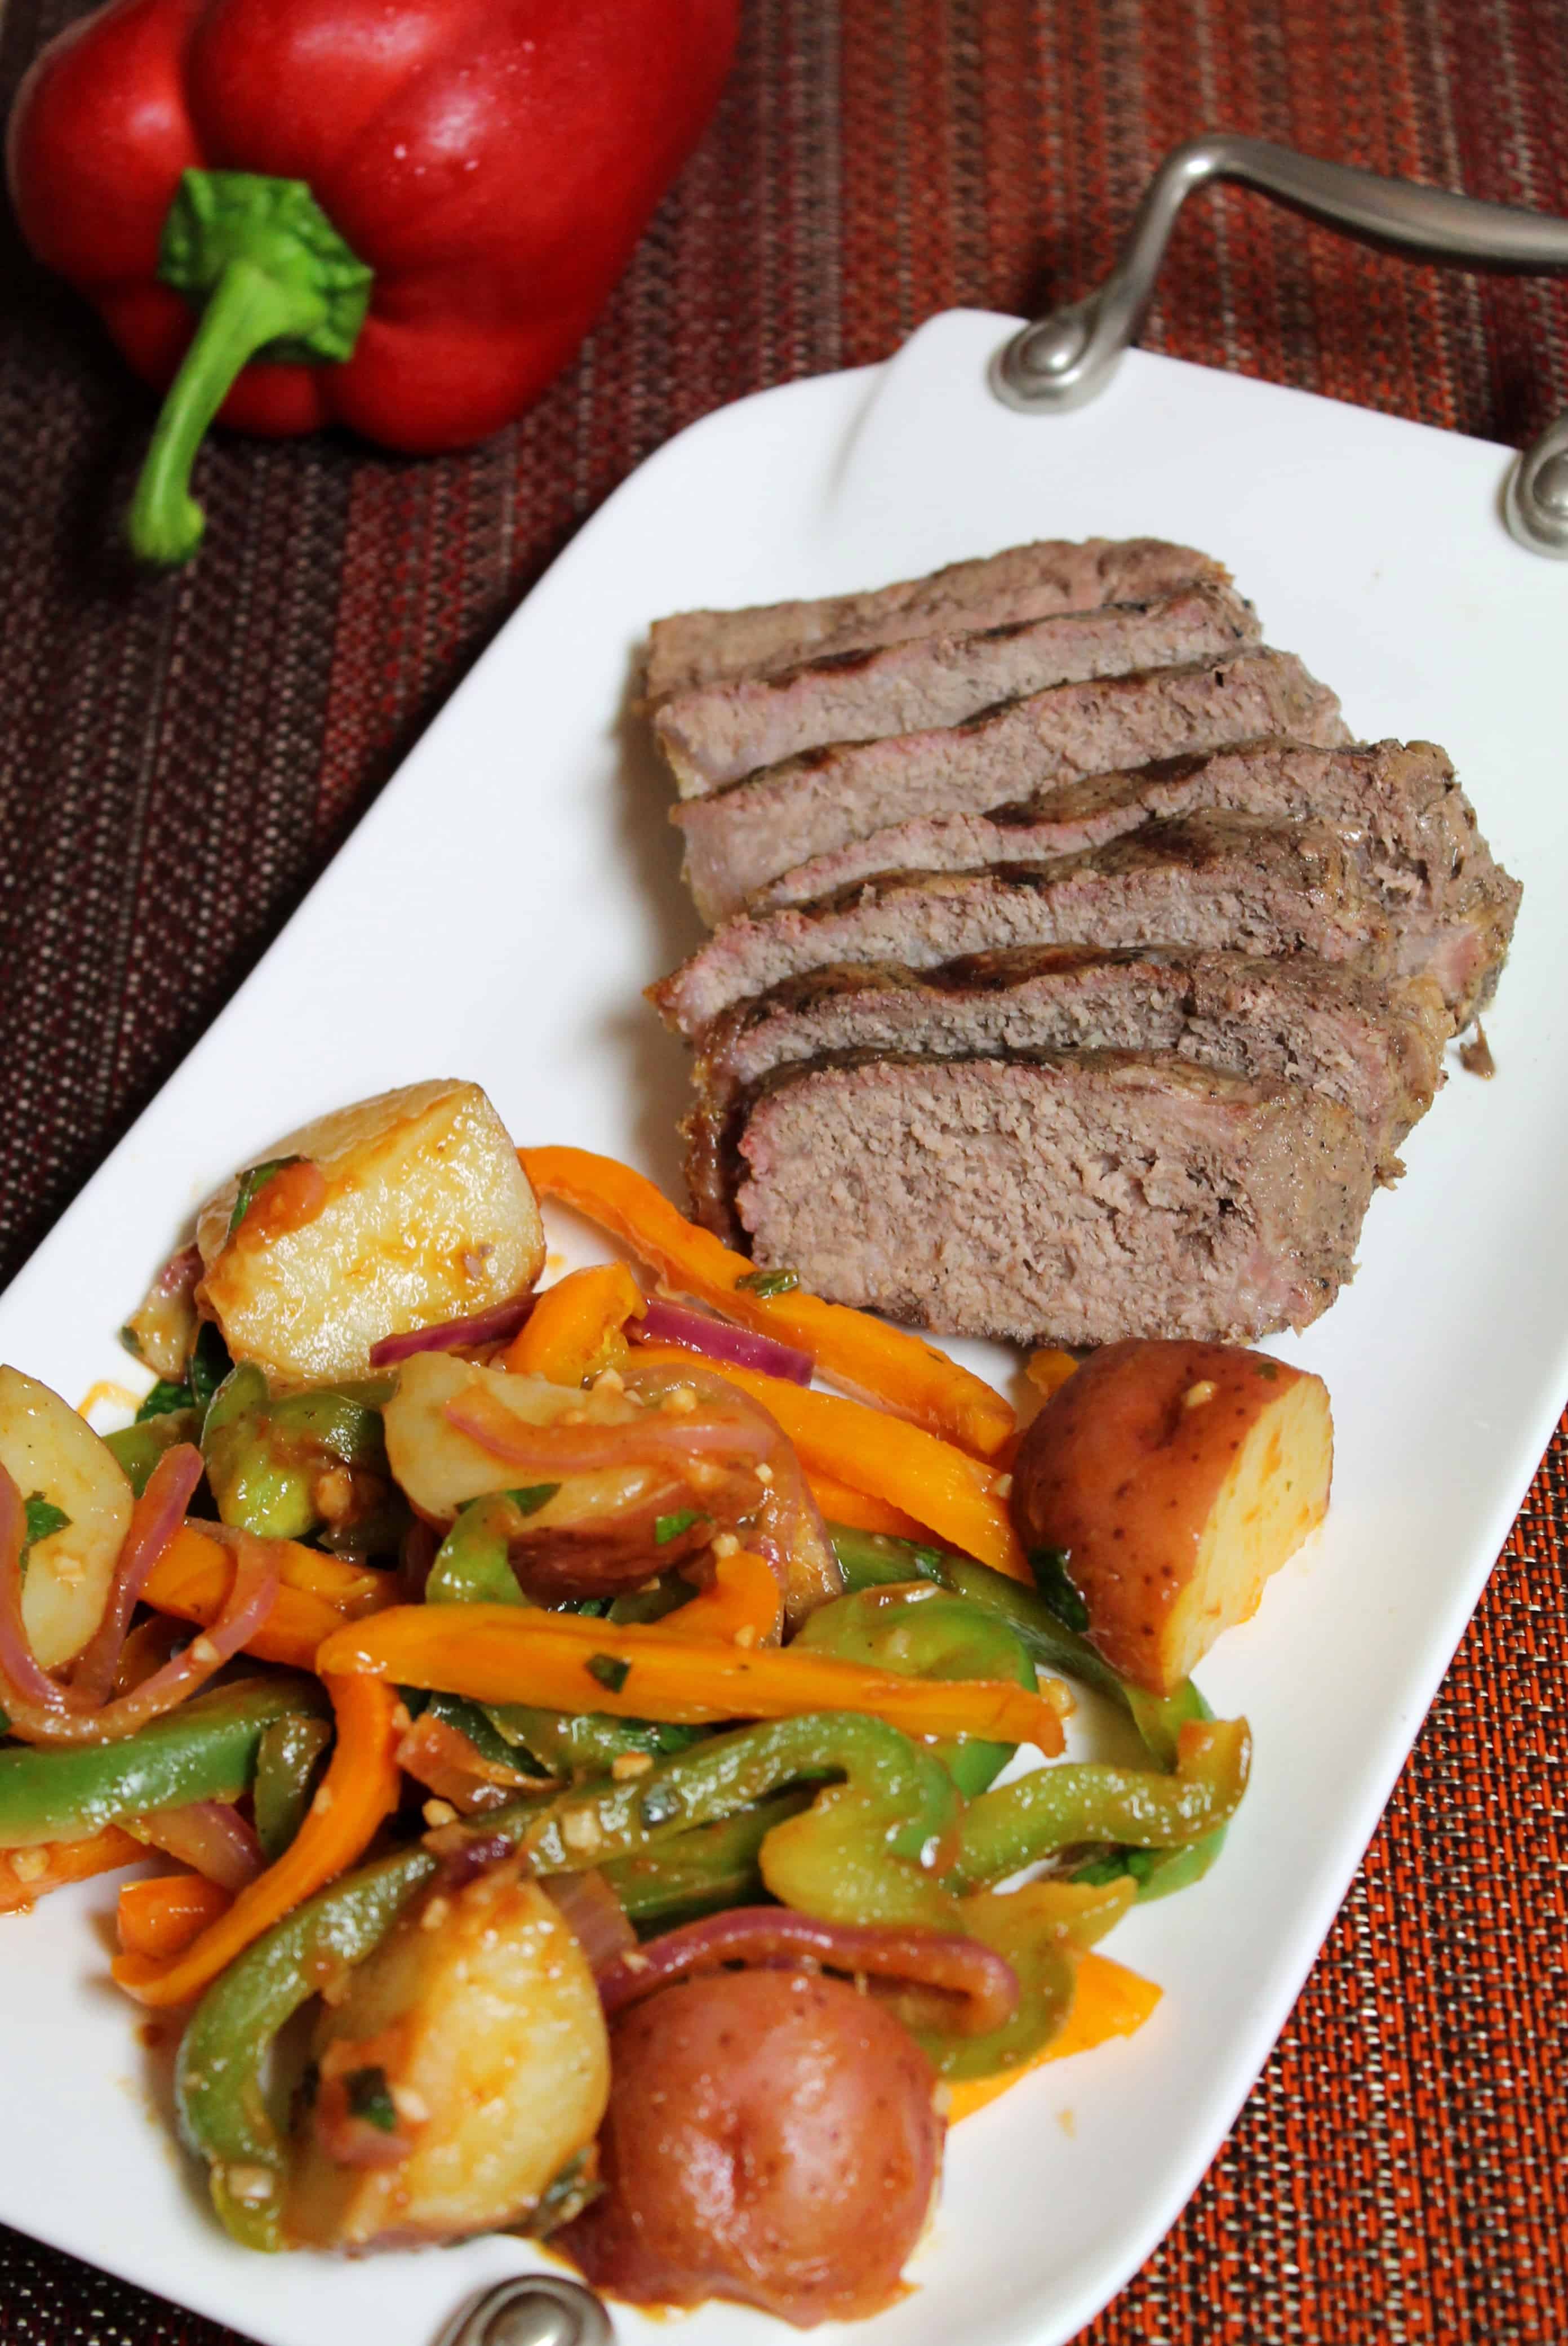 https://www.thespiffycookie.com/wp-content/uploads/2014/05/Grilled-Steak-with-Peppers-and-Potatoes.jpg